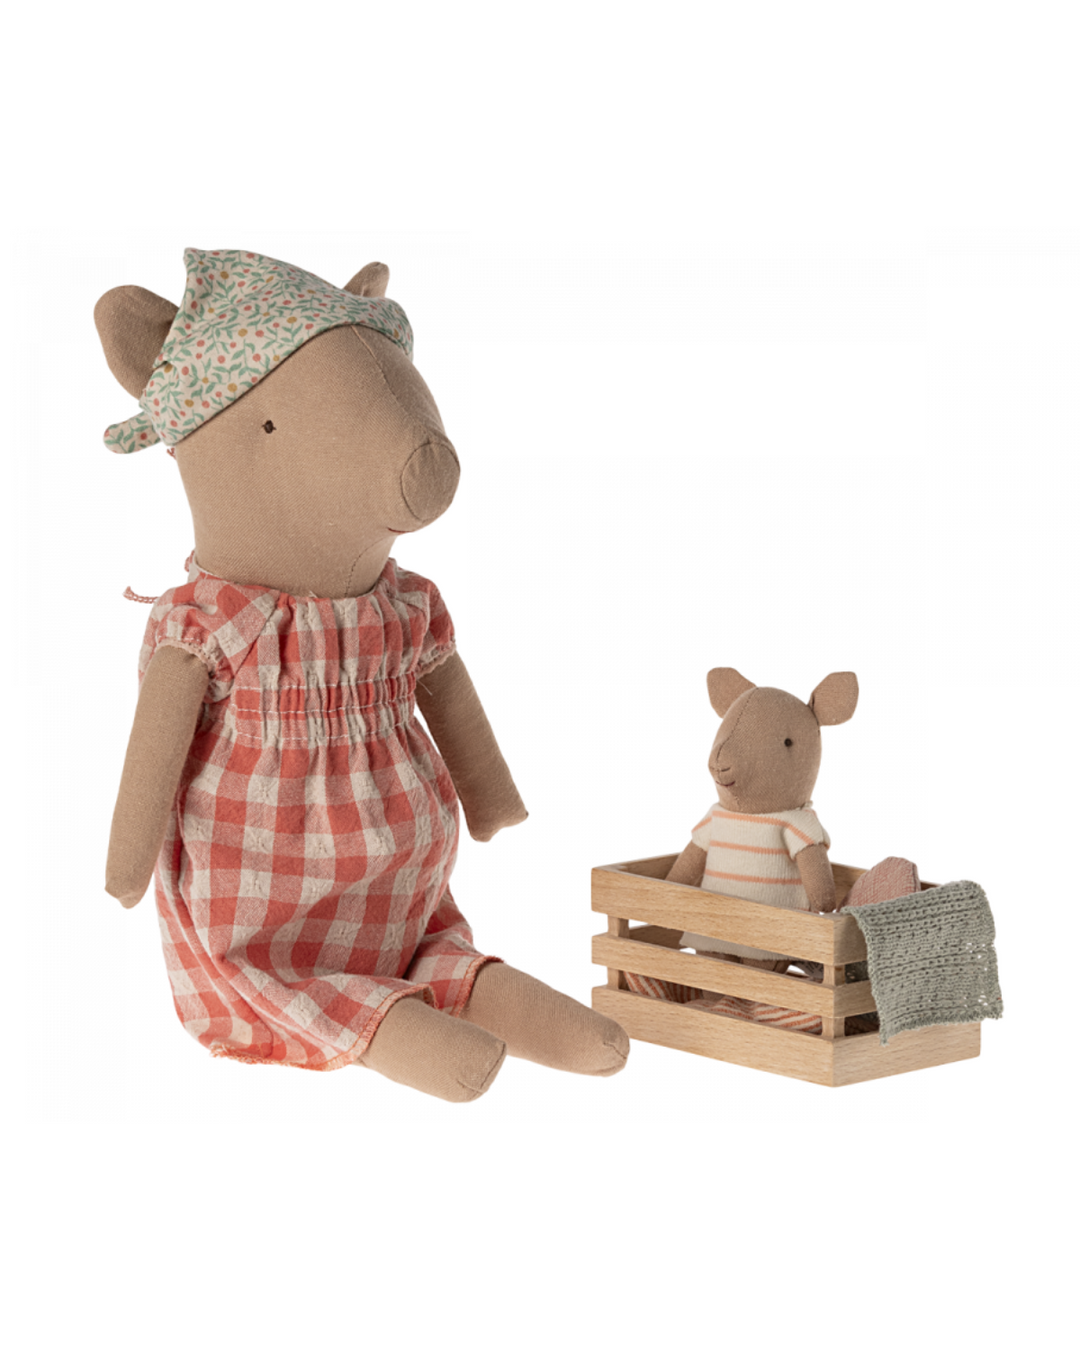 Discover the whimsical Maileg Girl Pig, the perfect companion for imaginative play in your dollhouse